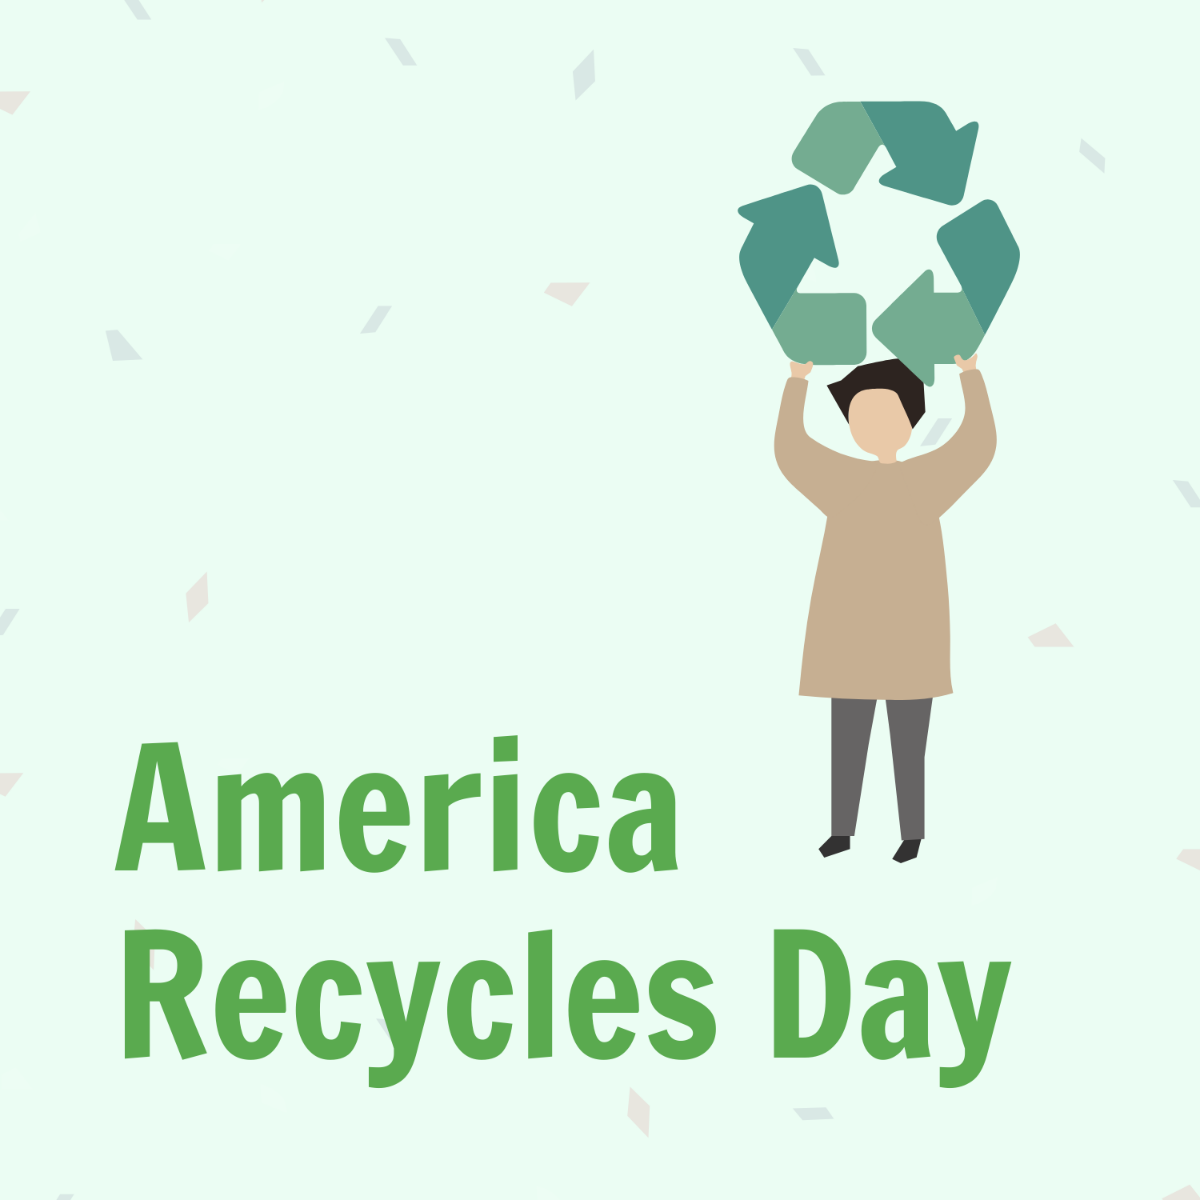 America Recycles Day Illustration